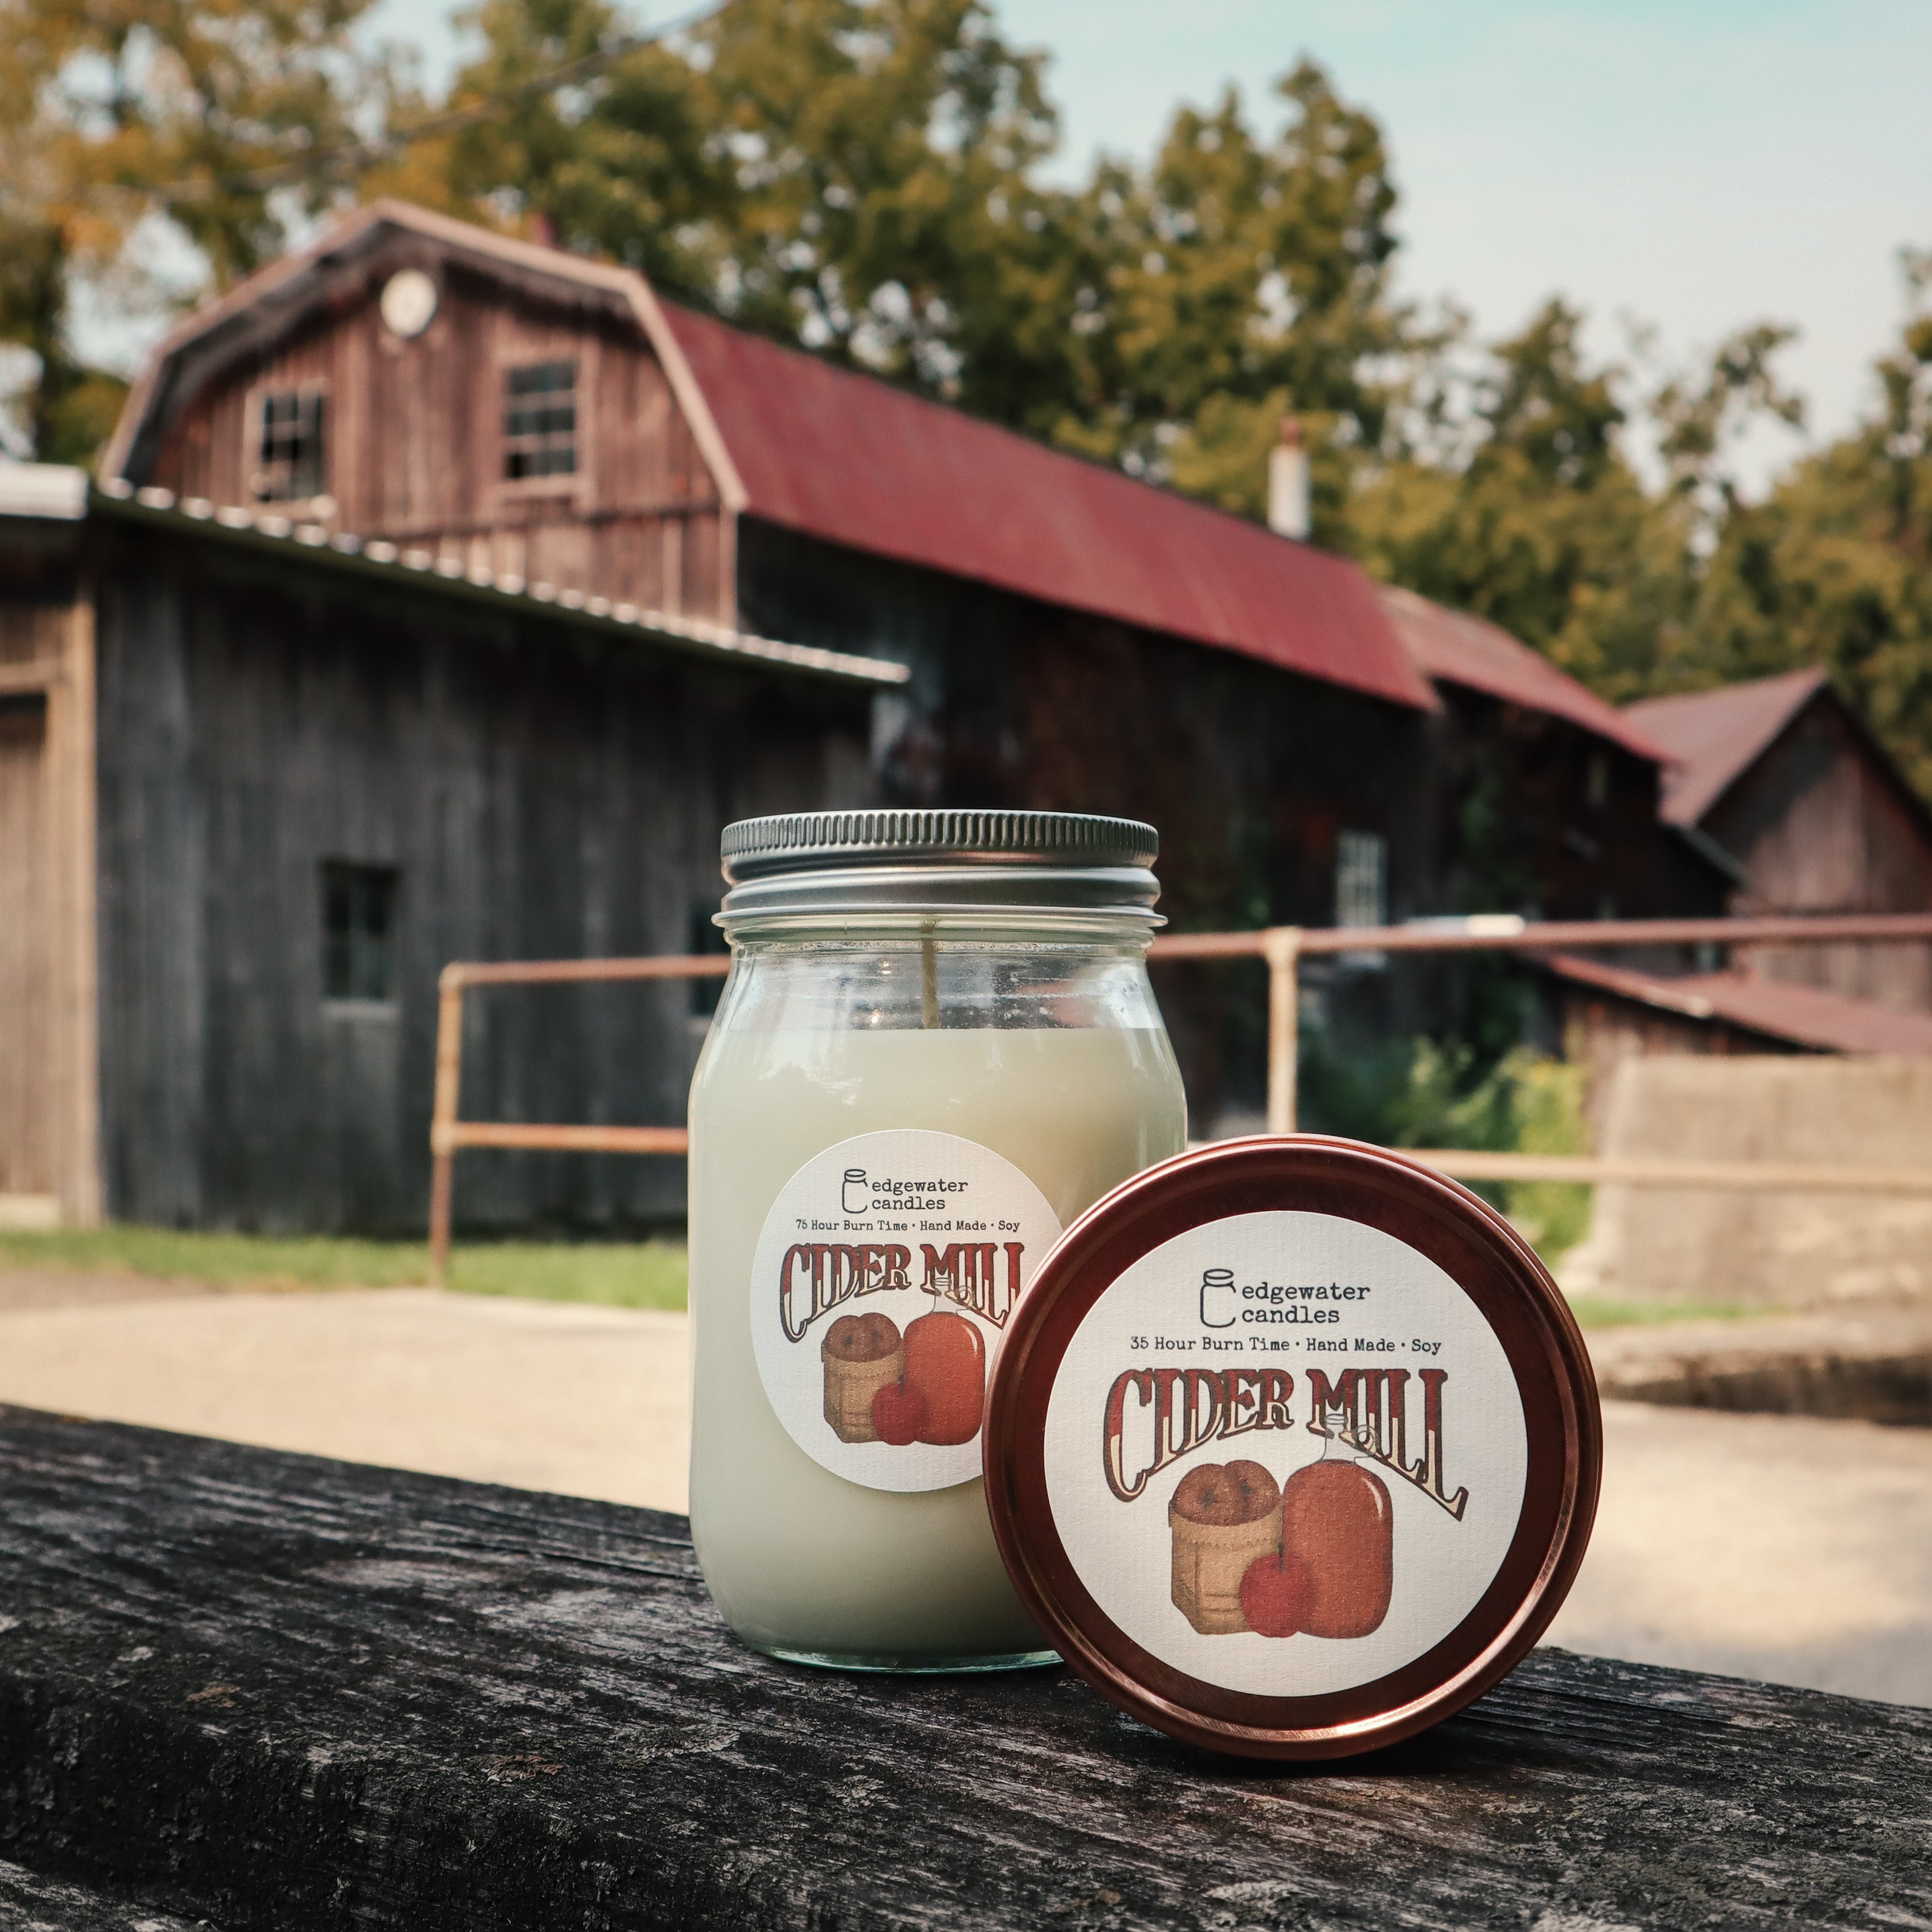 The Edgewater Candles team visits a Cider Mill!